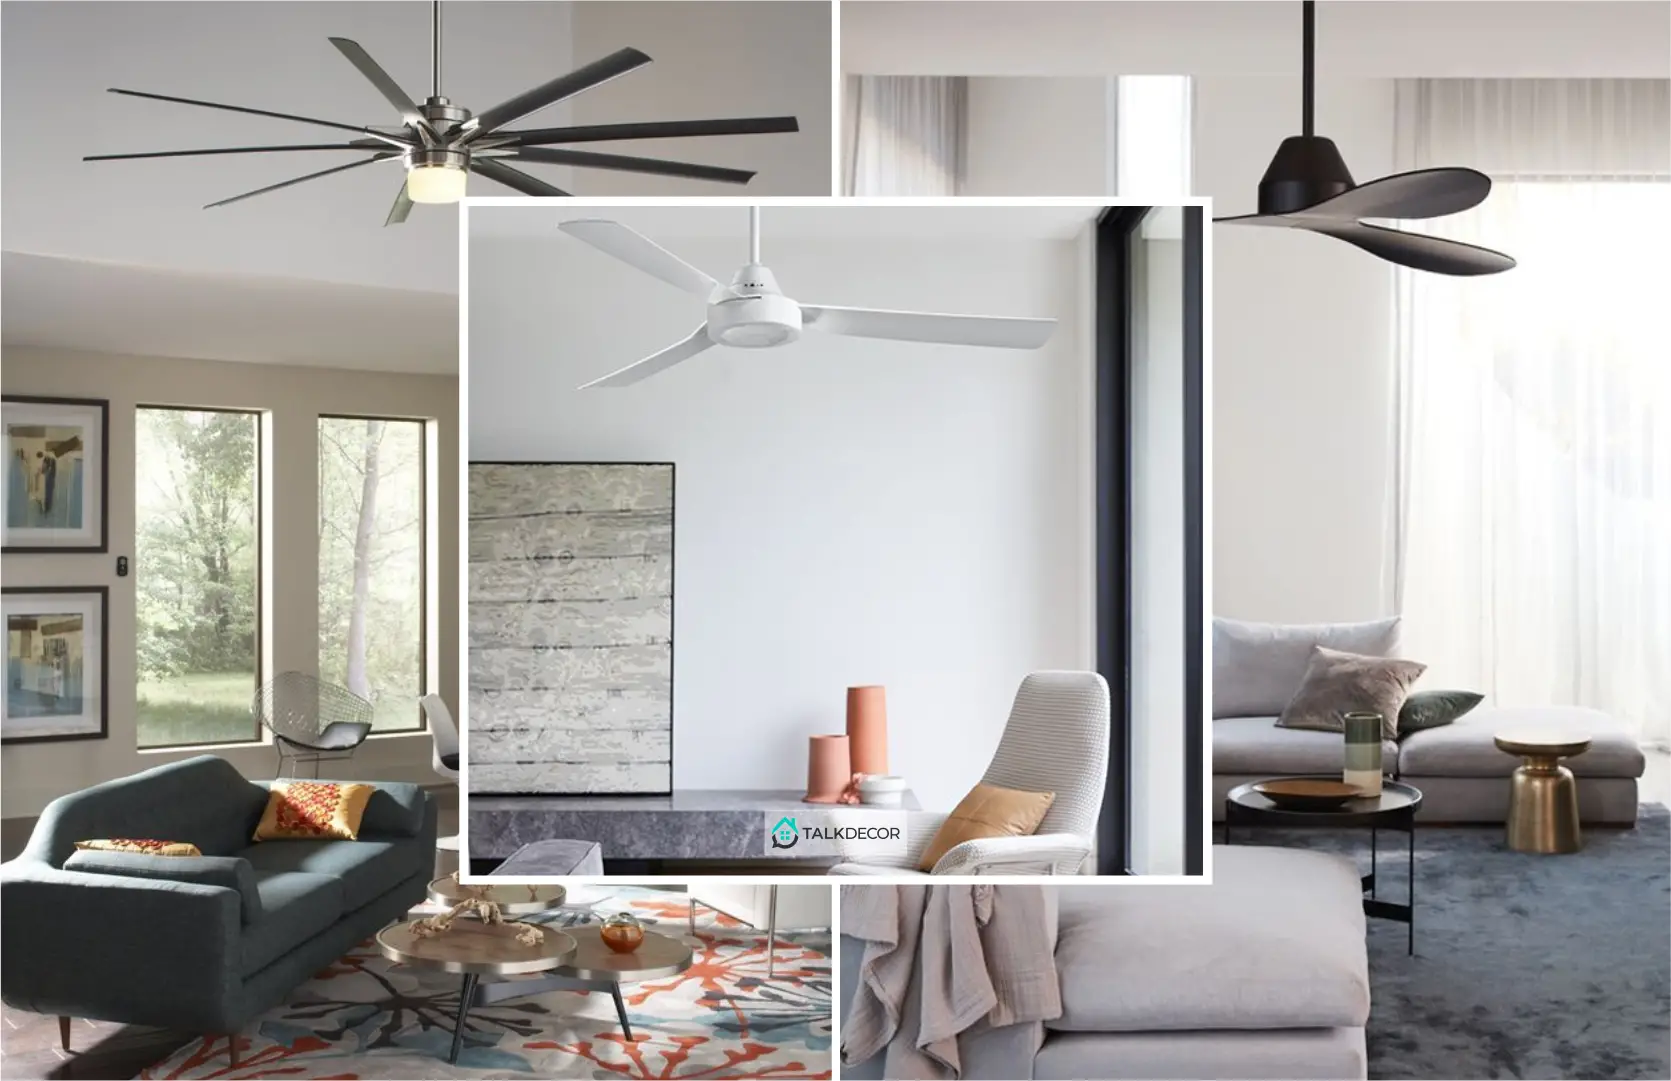 Providing Ceiling Fan For Your Summer Home